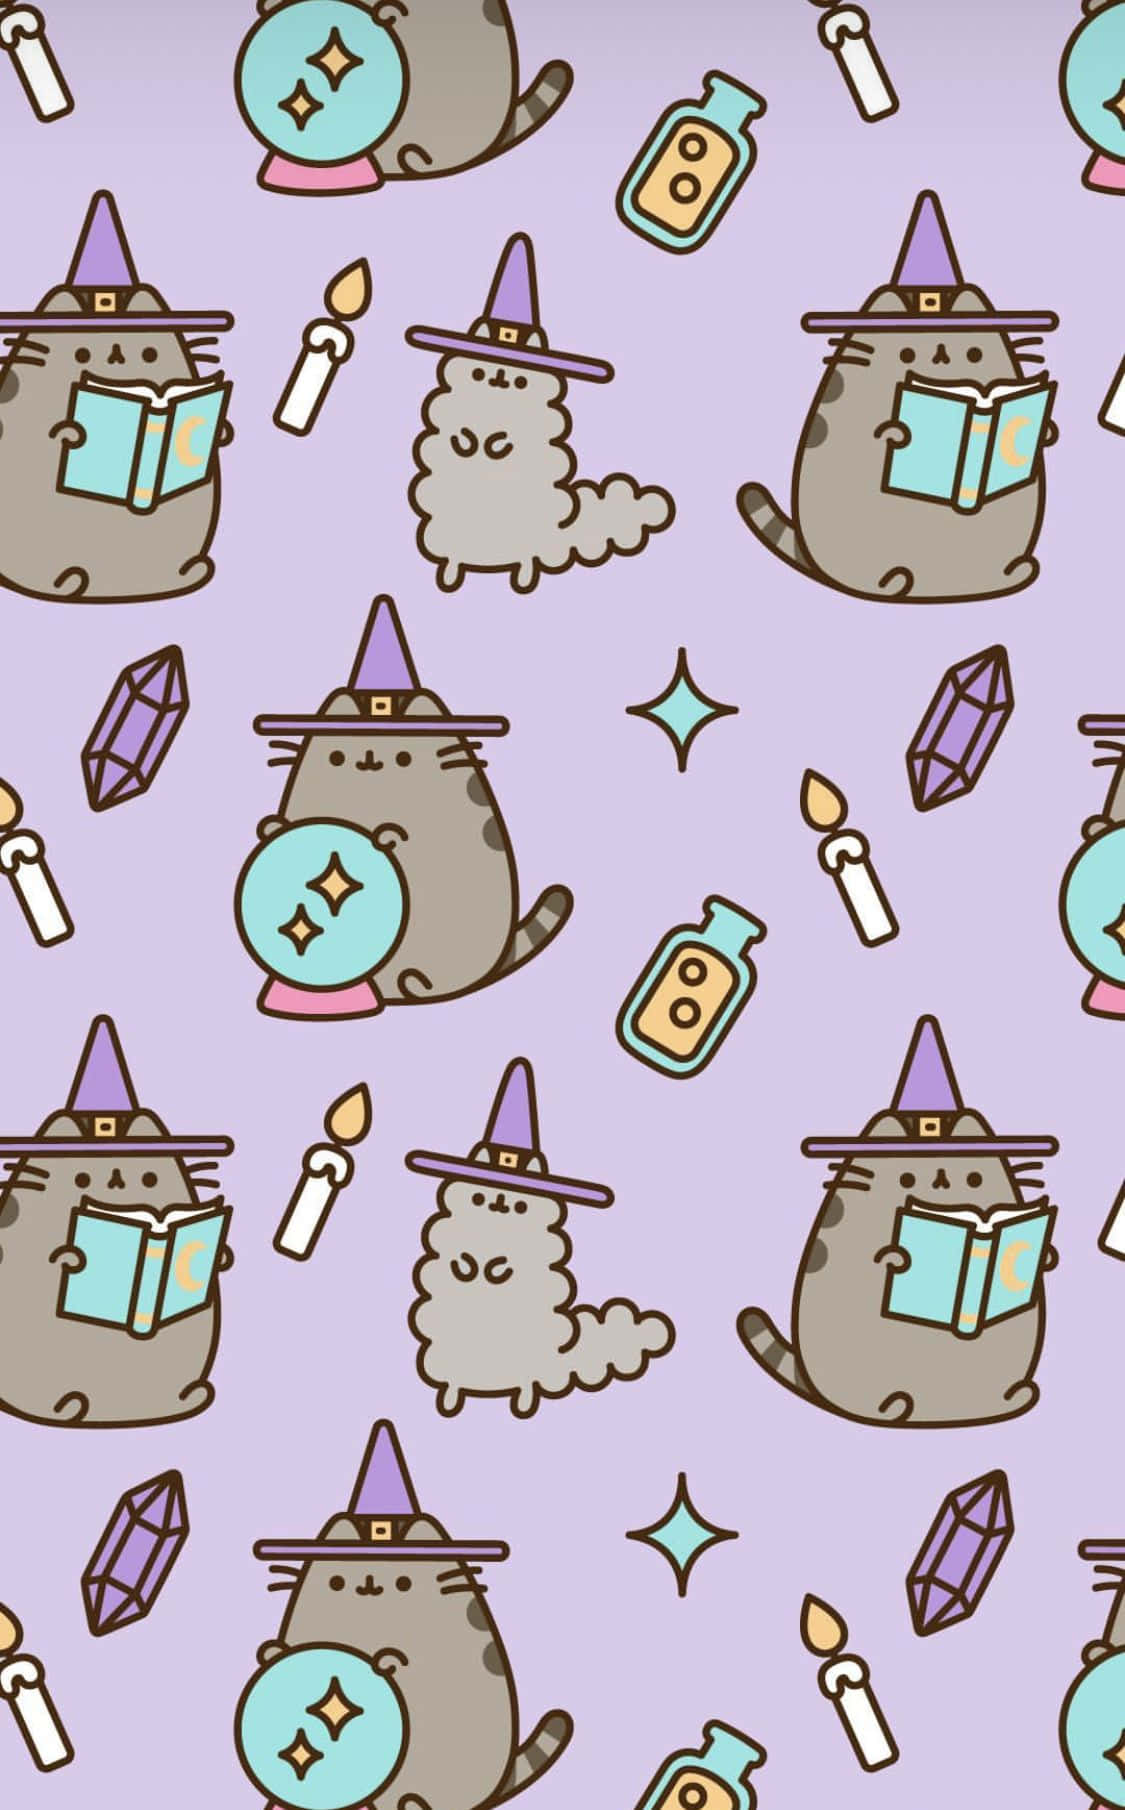 Have a Cuddly Day with Pusheen!